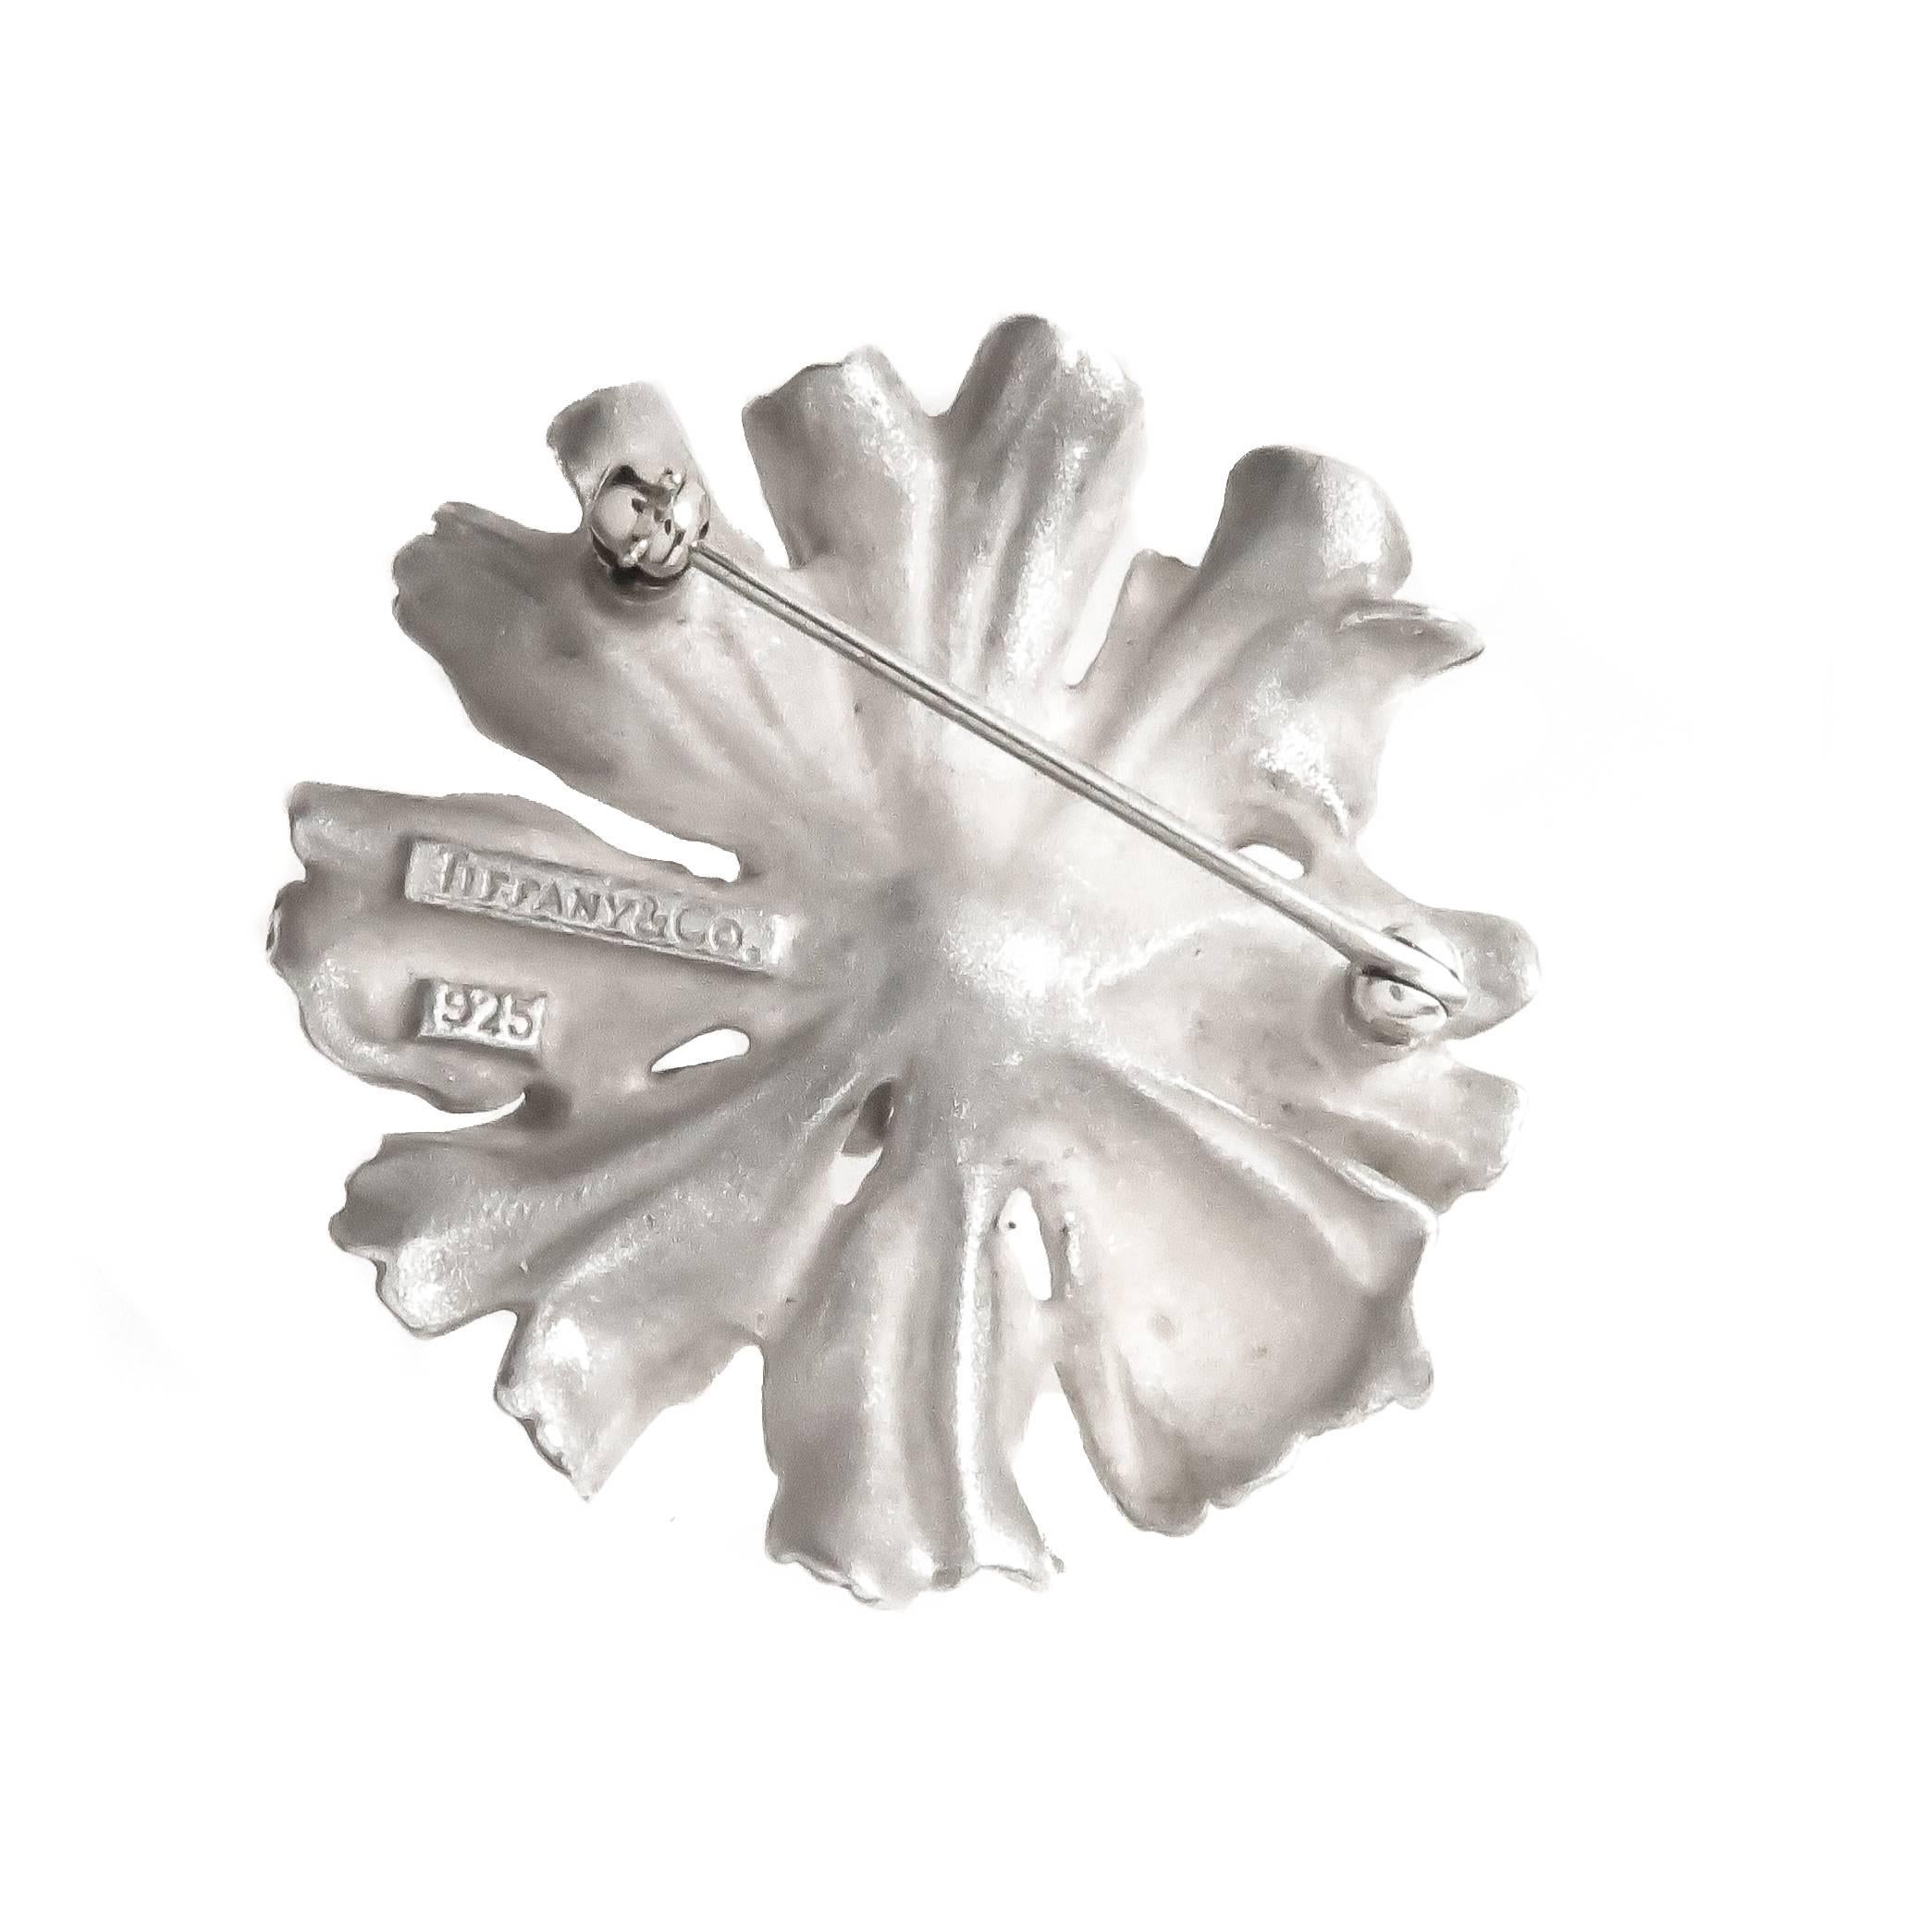 Circa 1990s Tiffany & Company Sterling Silver Alpine Rose Flower Brooch. Measuring 1 1/2 inches in diameter. Very Detailed and in excellent, unworn condition. 